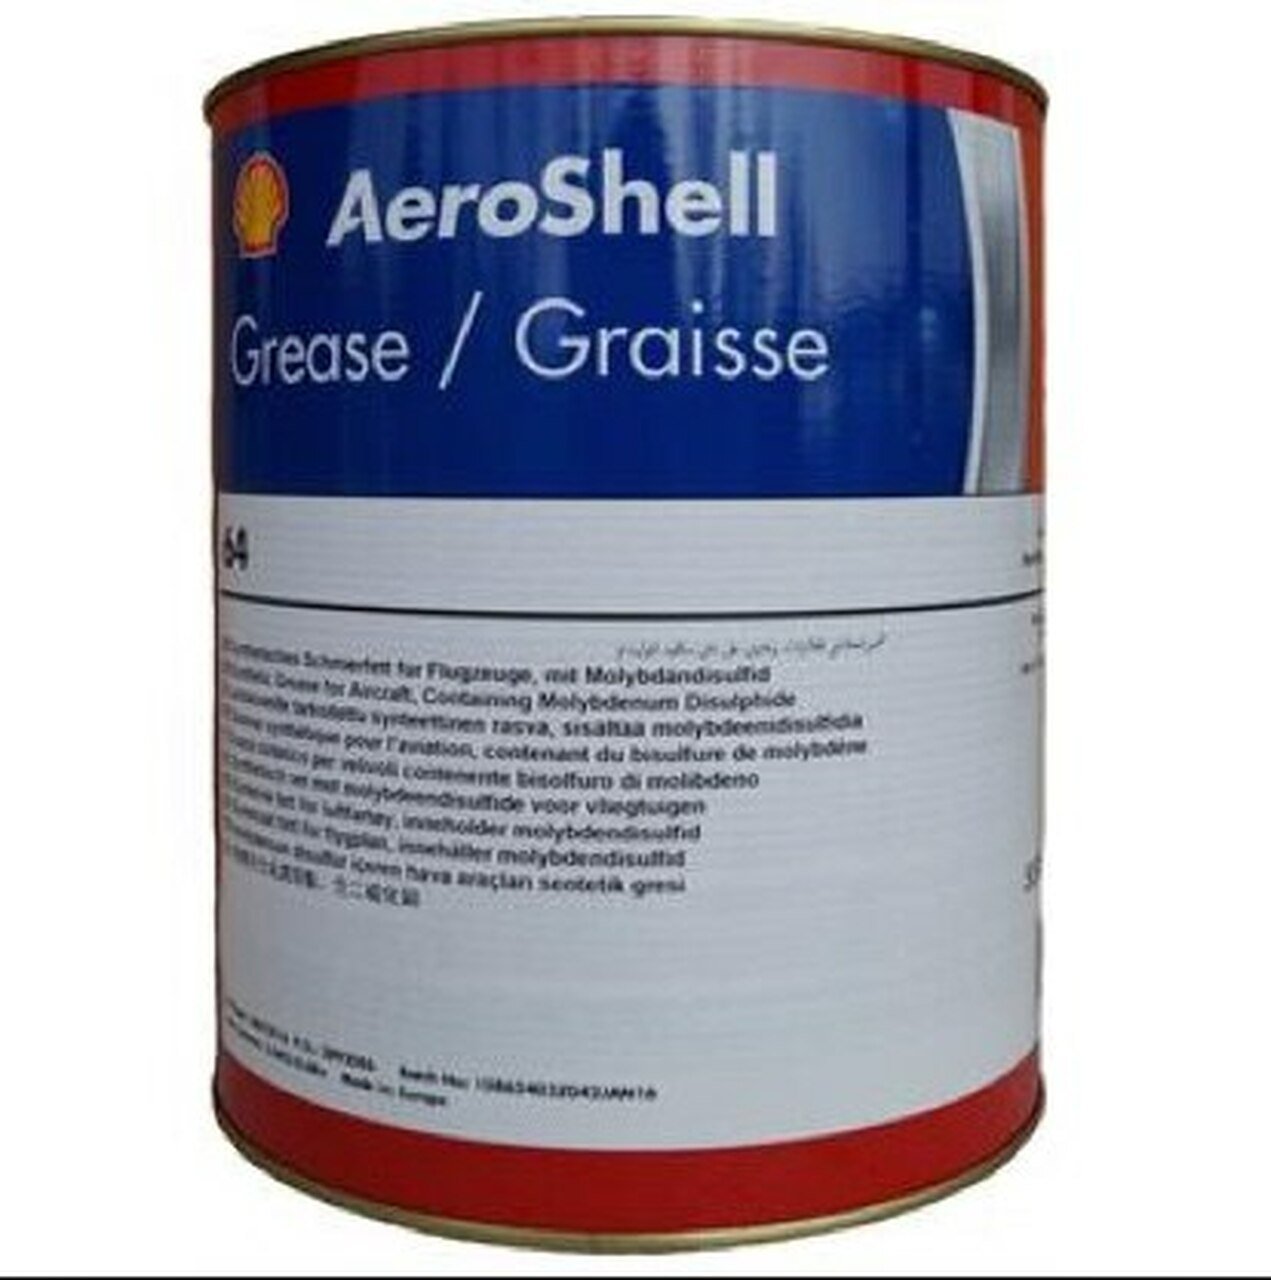  - AeroShell Grease 64 (formerly 33MS) Extreme Pressure Grease - 6.6 LB Can